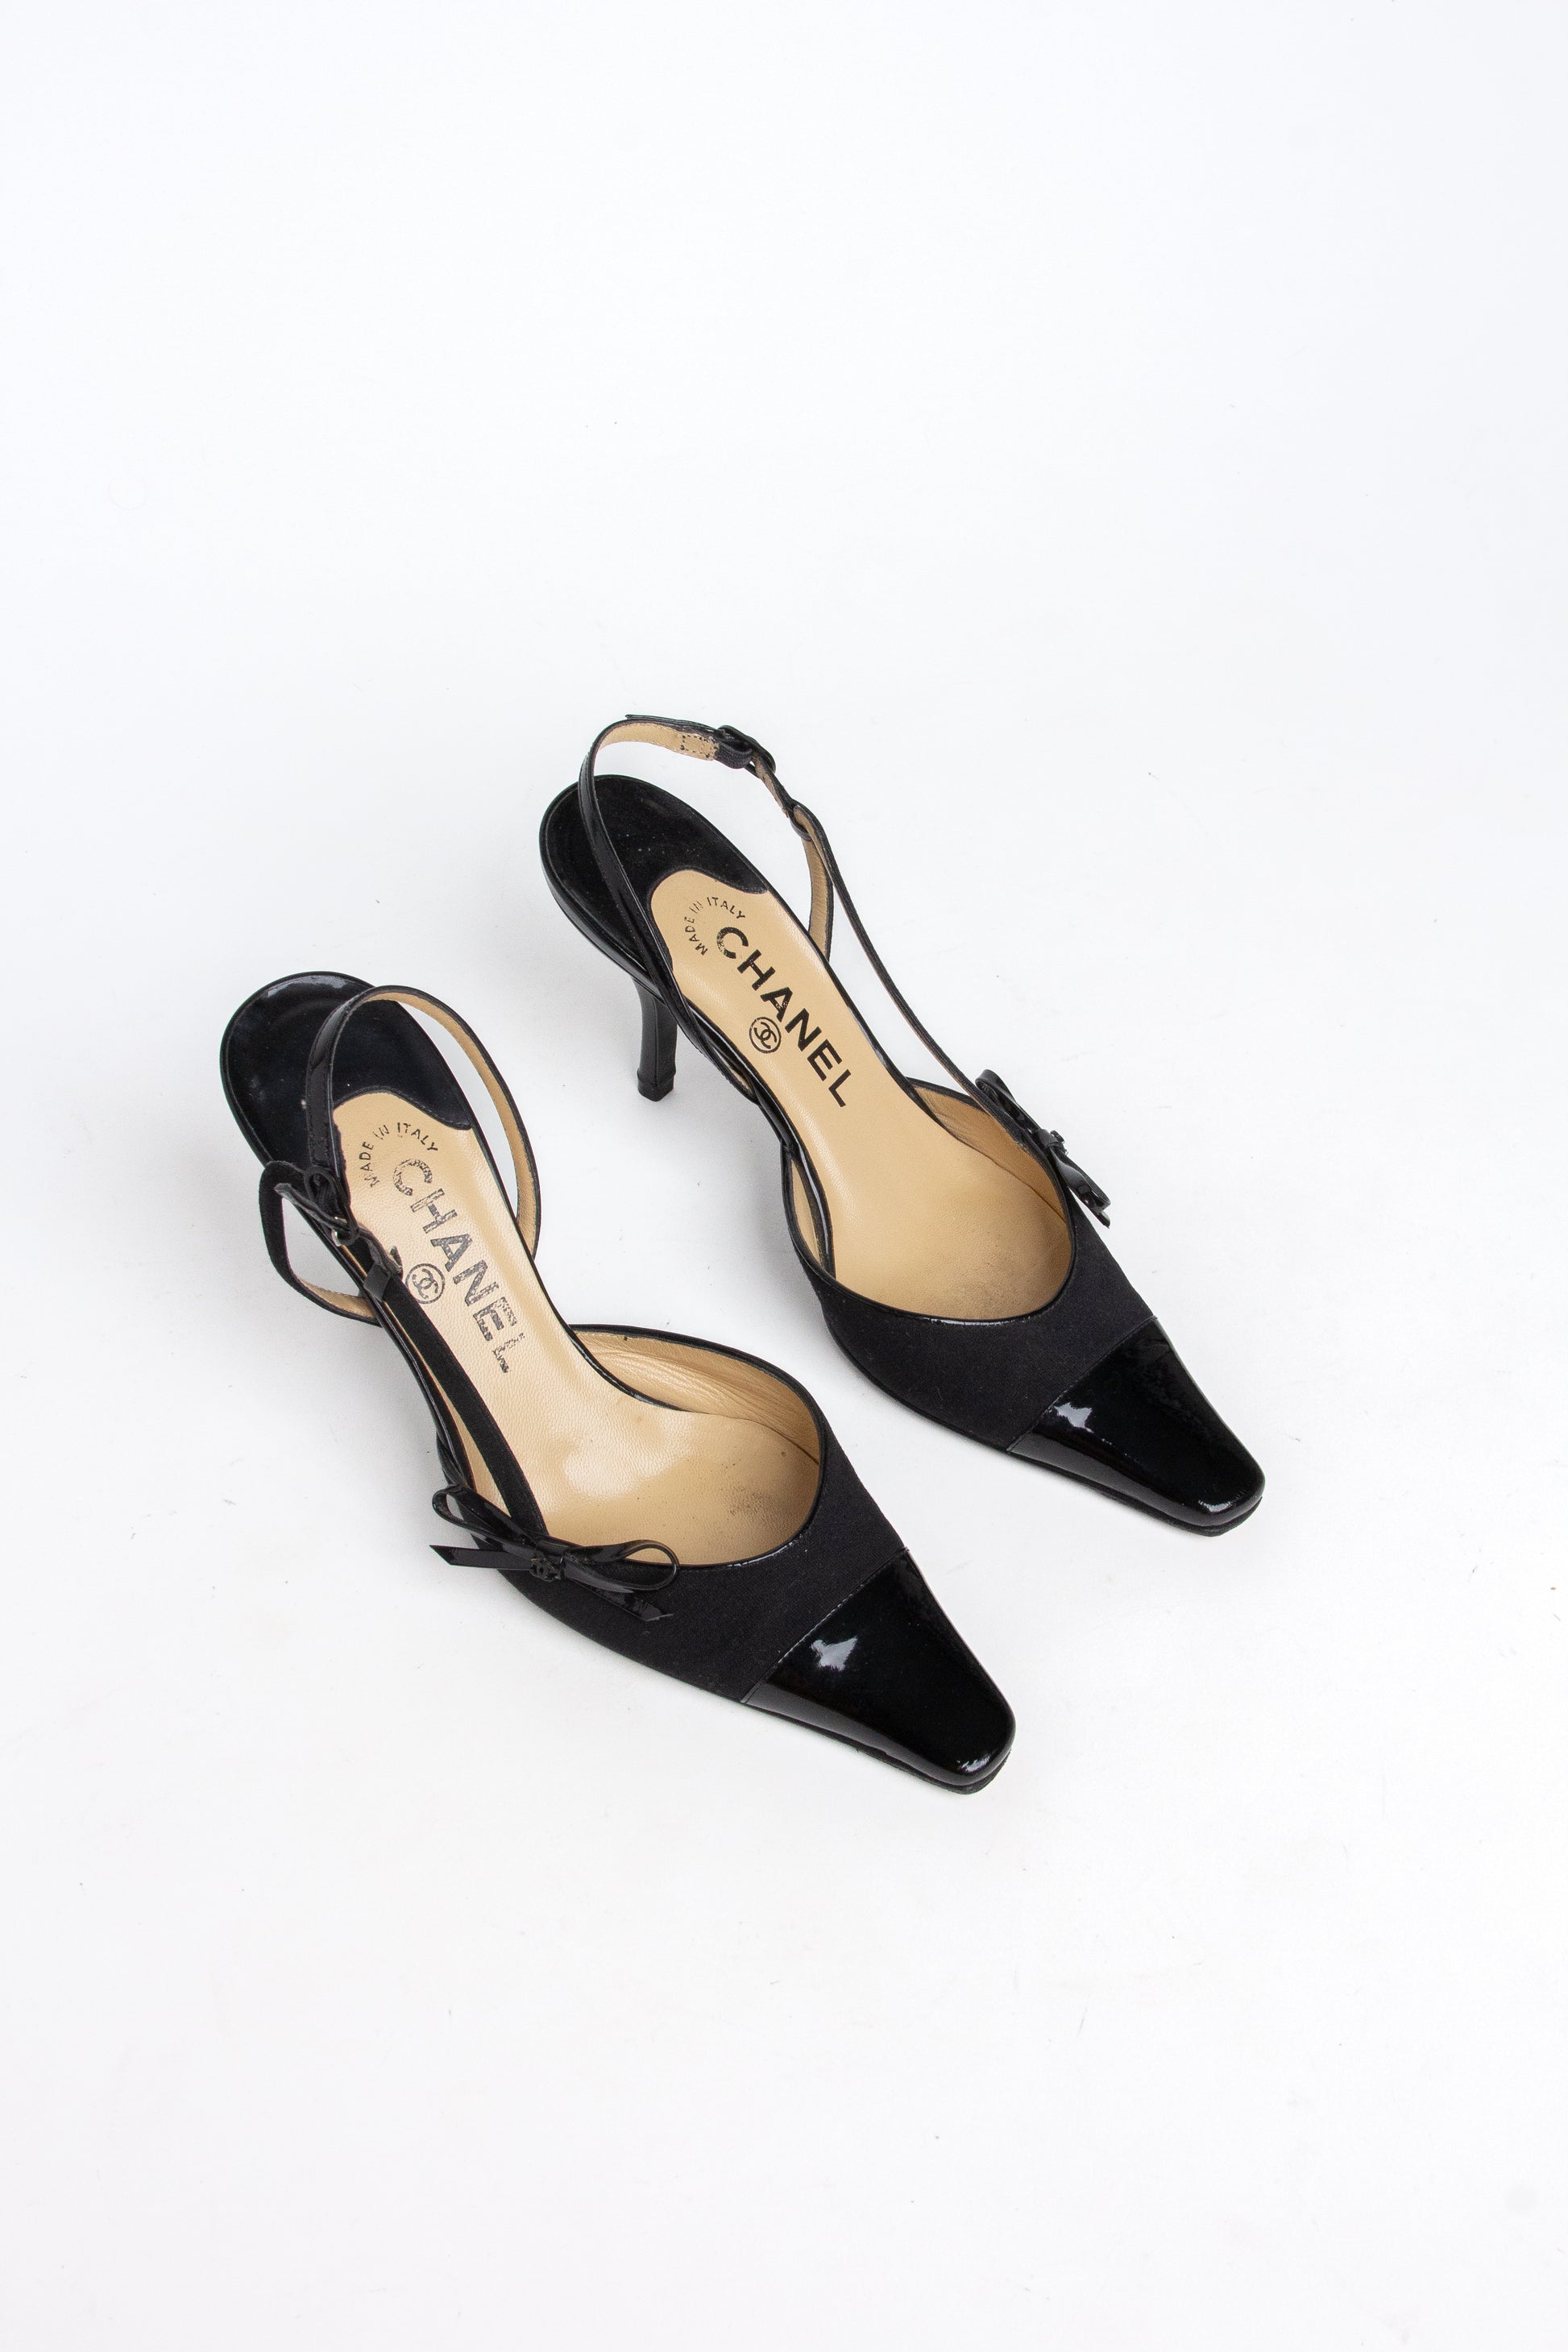 CHANEL, Shoes, Chanel Cap Toe Slingback Black And Nude Heels